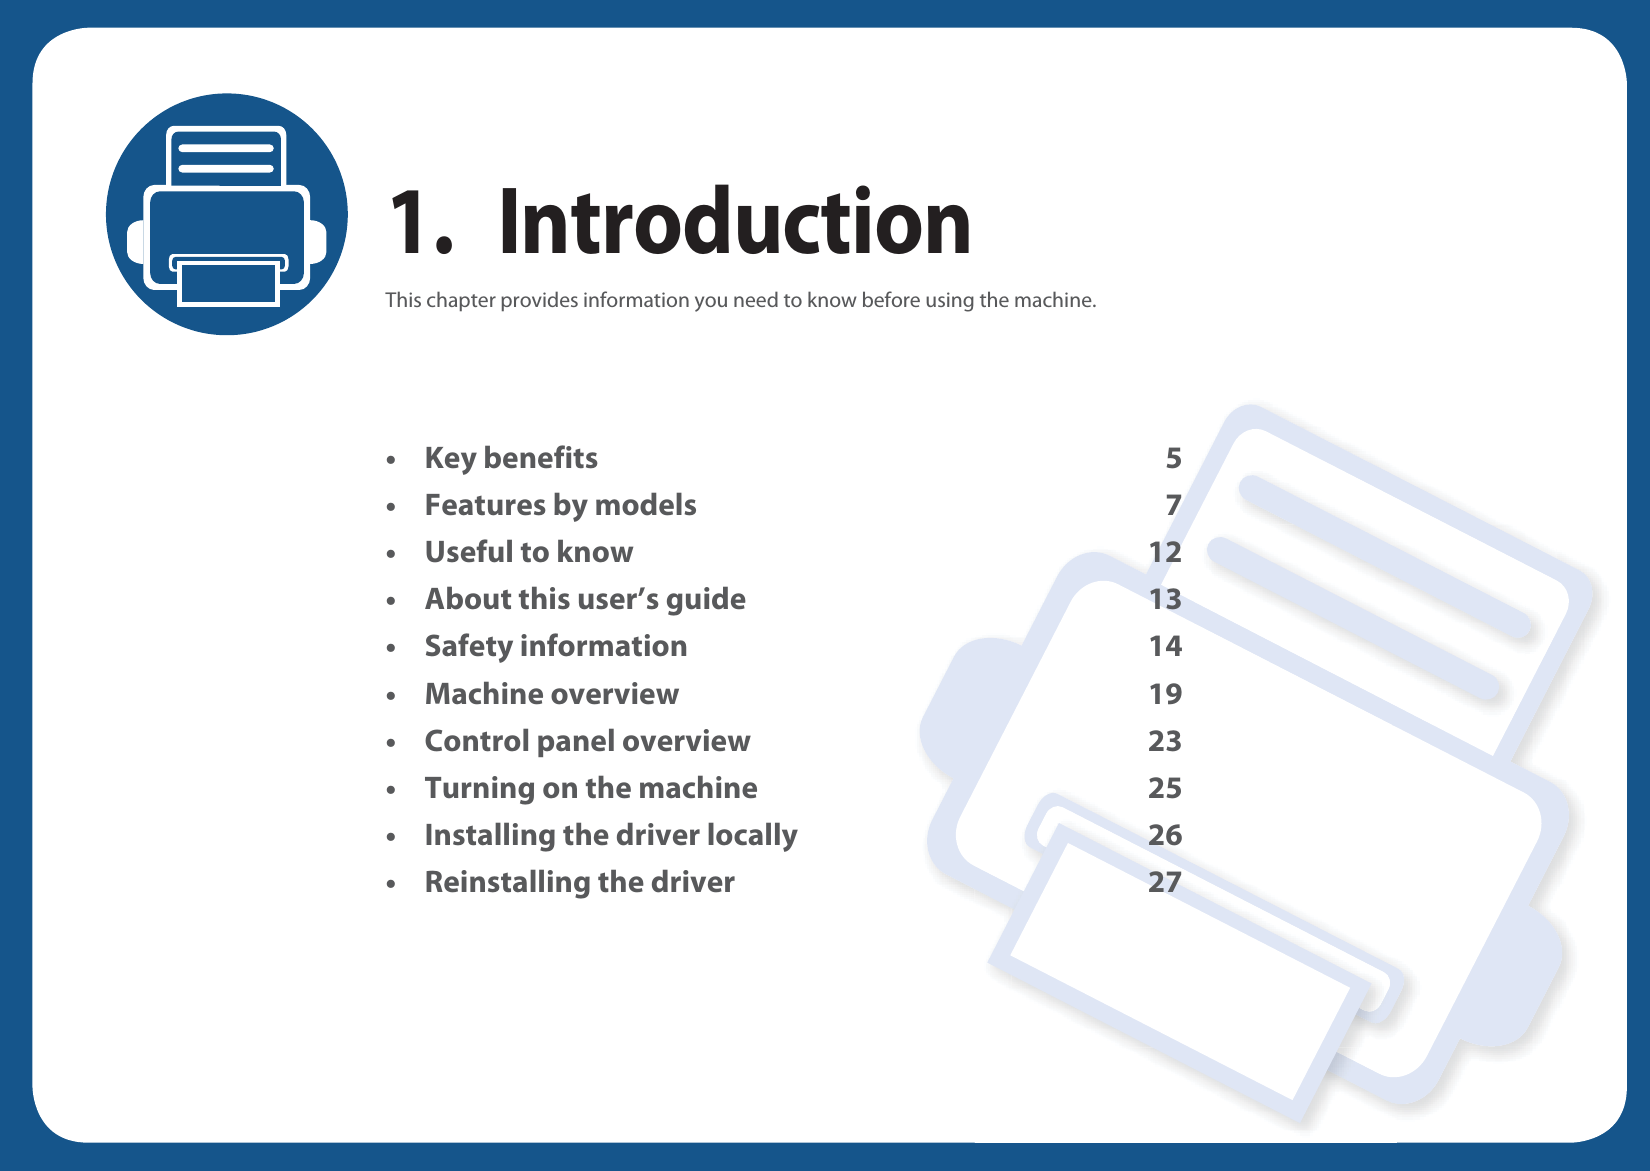 1. IntroductionThis chapter provides information you need to know before using the machine.•Key benefits 5• Features by models 7• Useful to know 12• About this user’s guide 13• Safety information 14• Machine overview 19• Control panel overview 23• Turning on the machine 25• Installing the driver locally 26• Reinstalling the driver 27